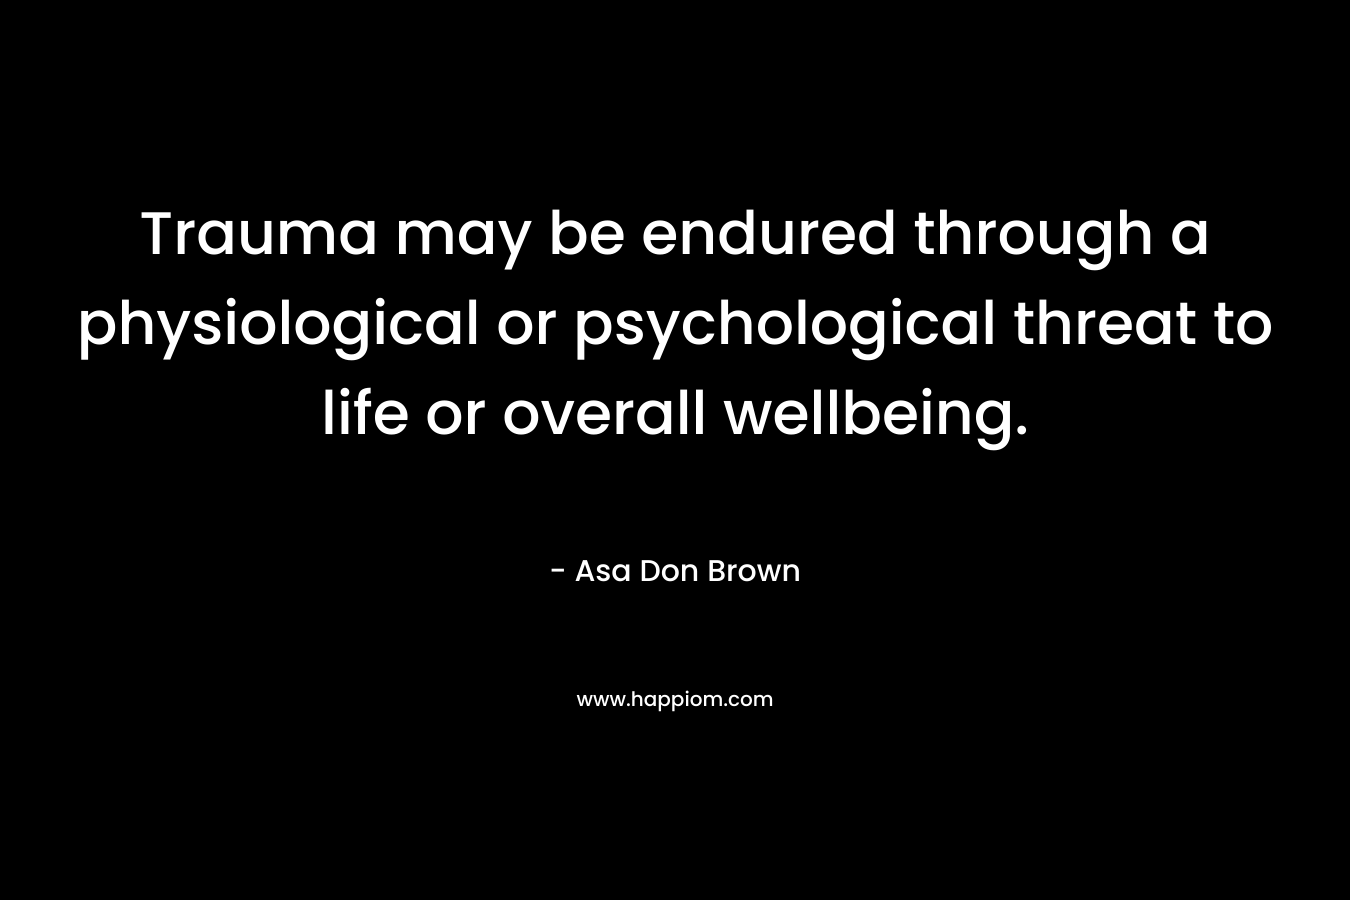 Trauma may be endured through a physiological or psychological threat to life or overall wellbeing.